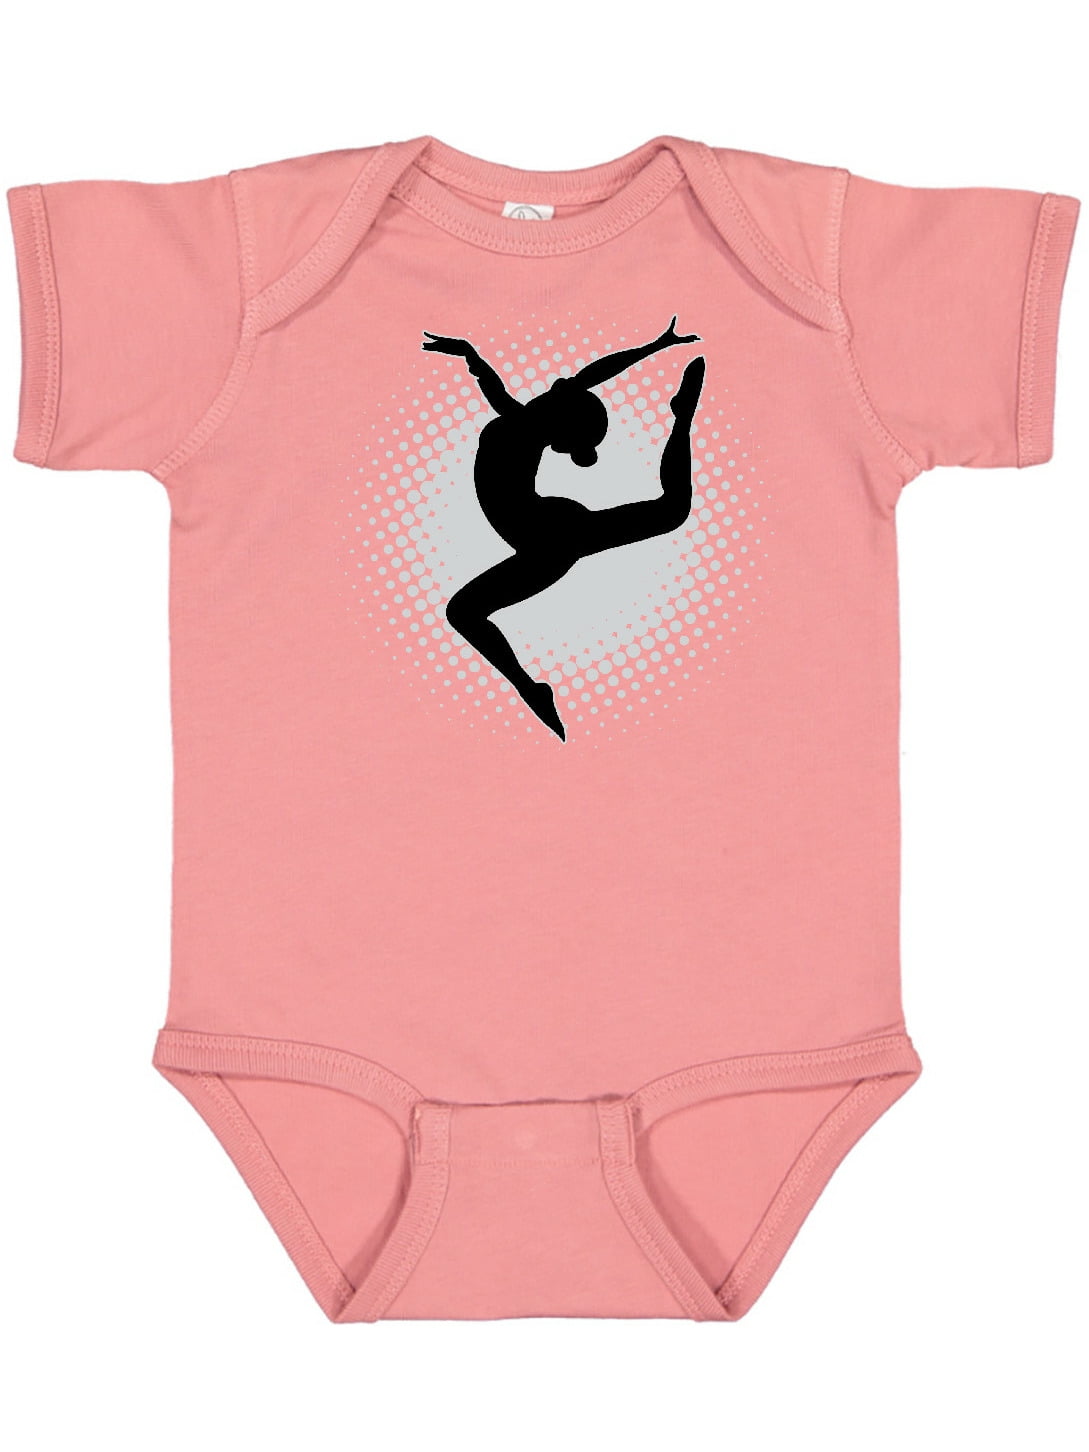 Born To Be A DJ Music BABY BODYSUIT GROW VEST GIRL BOY CLOTHES GIFT romper dance 